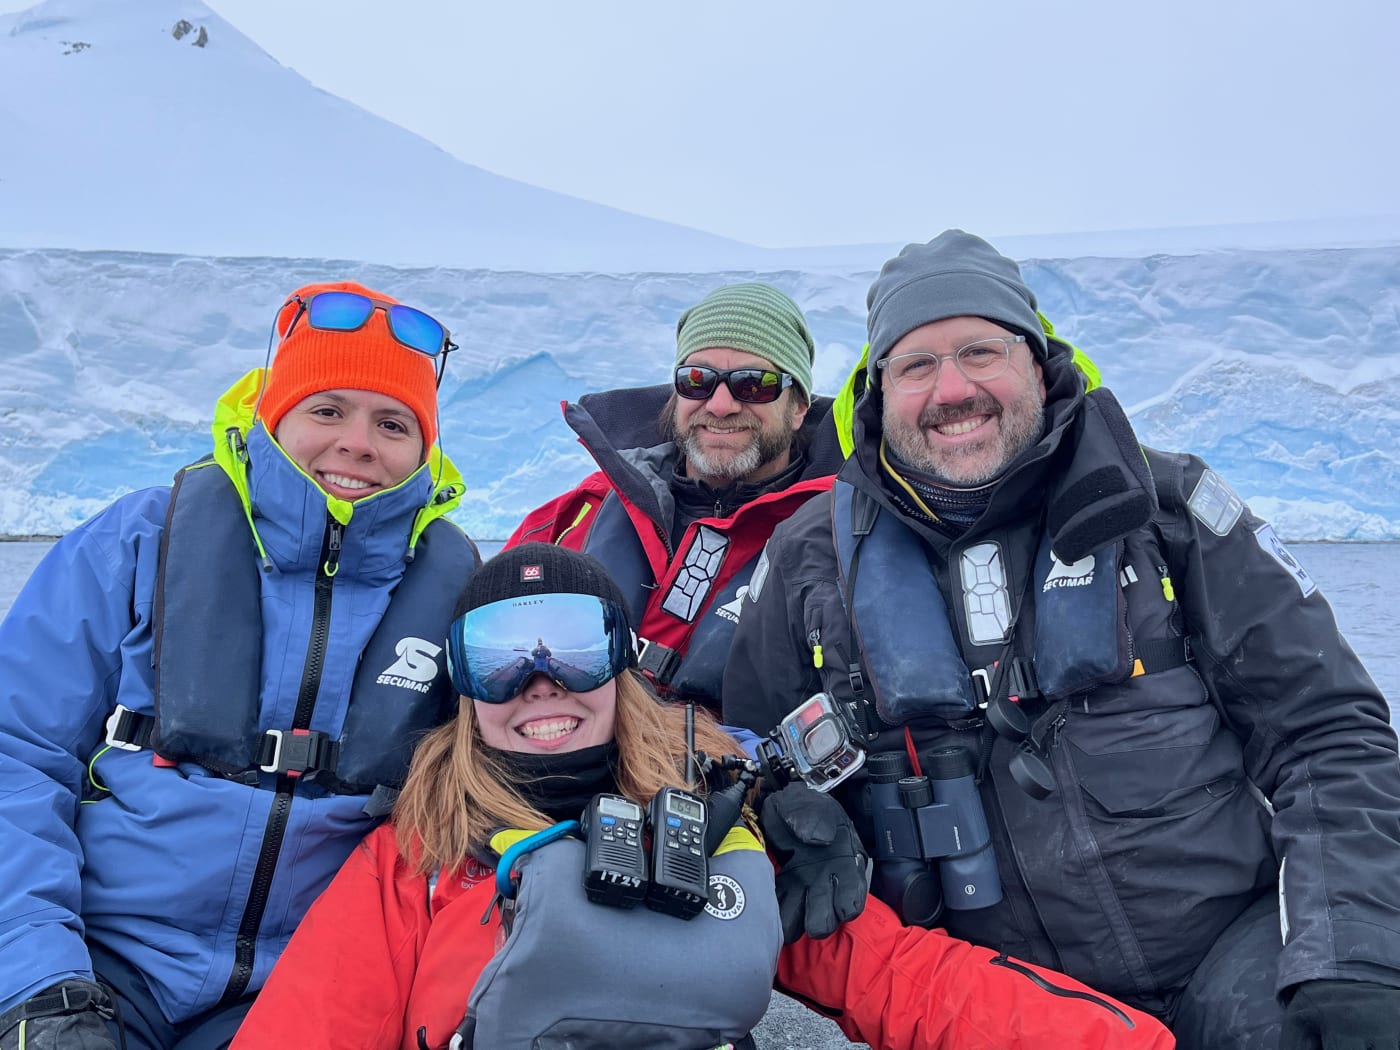 The WWF whale team at the end of an amazing expedition! - Left to right Dr Natalia Botero-Acosta (Colombia), Eva Prendergast (Intrepid Travel), Dr Ari Friedlaender (UCSC), and Chris Johnson (WWF)